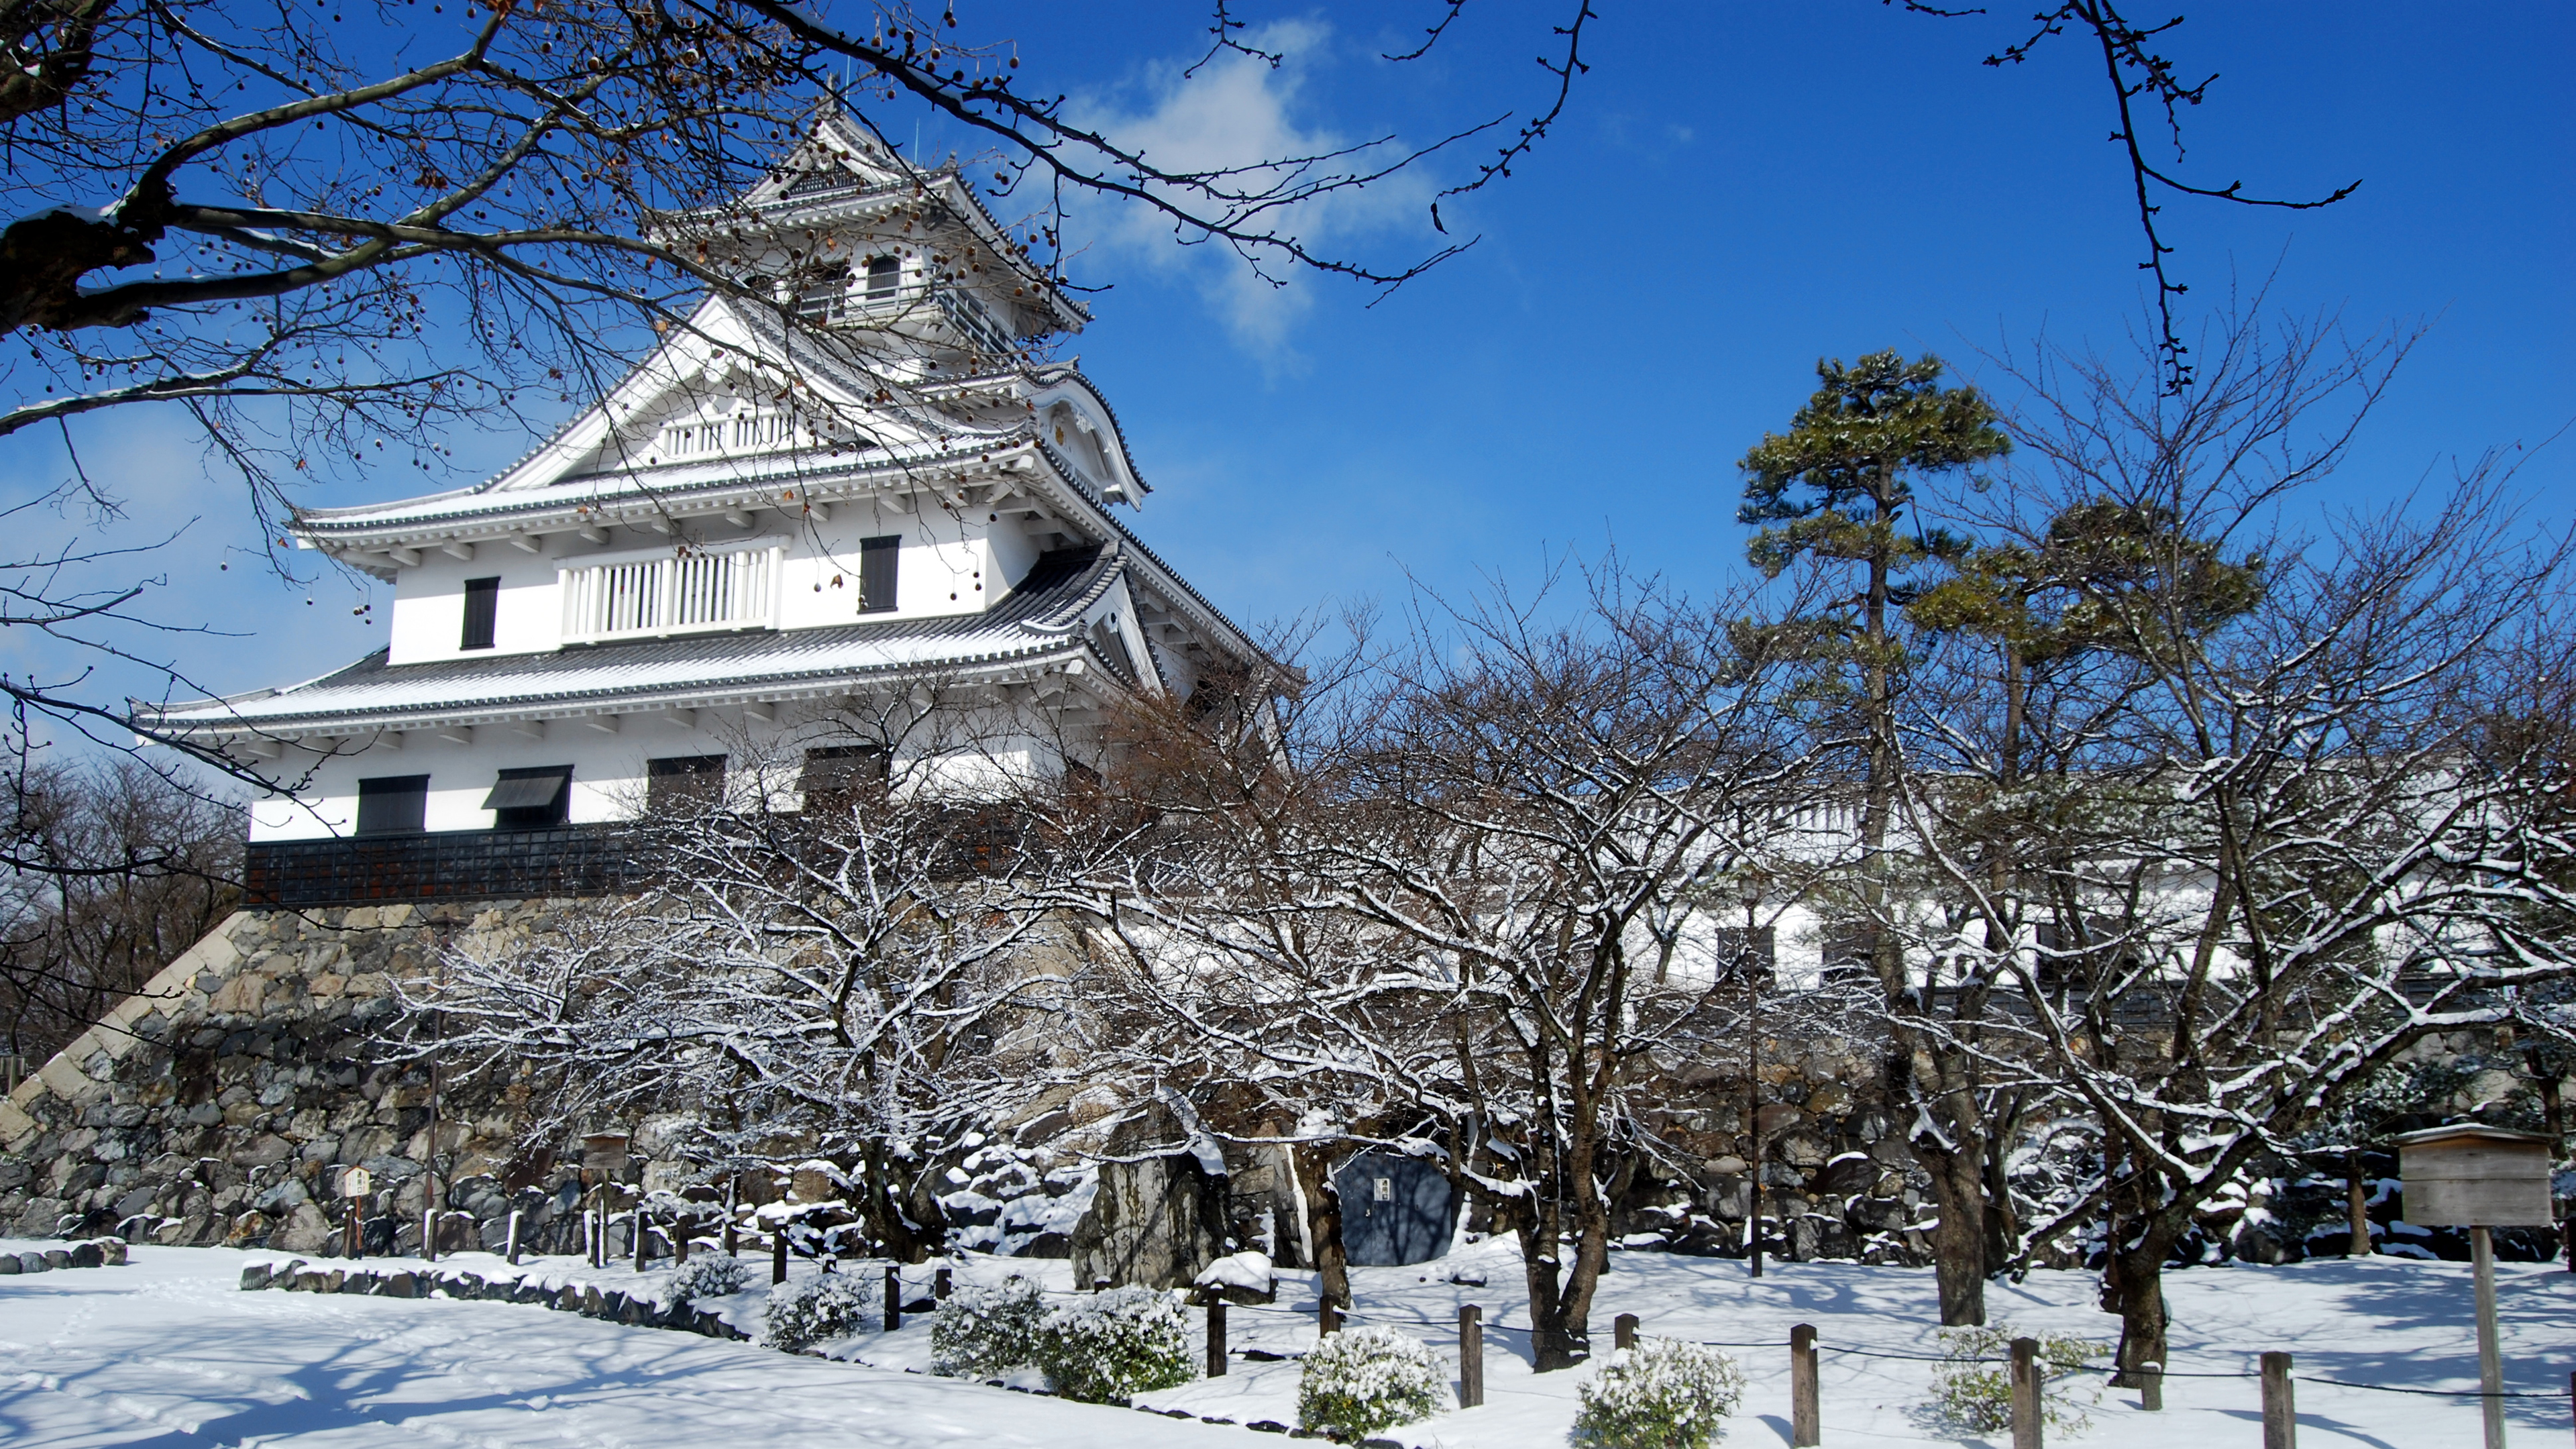 General 3840x2160 Japan winter snow temple Asian architecture